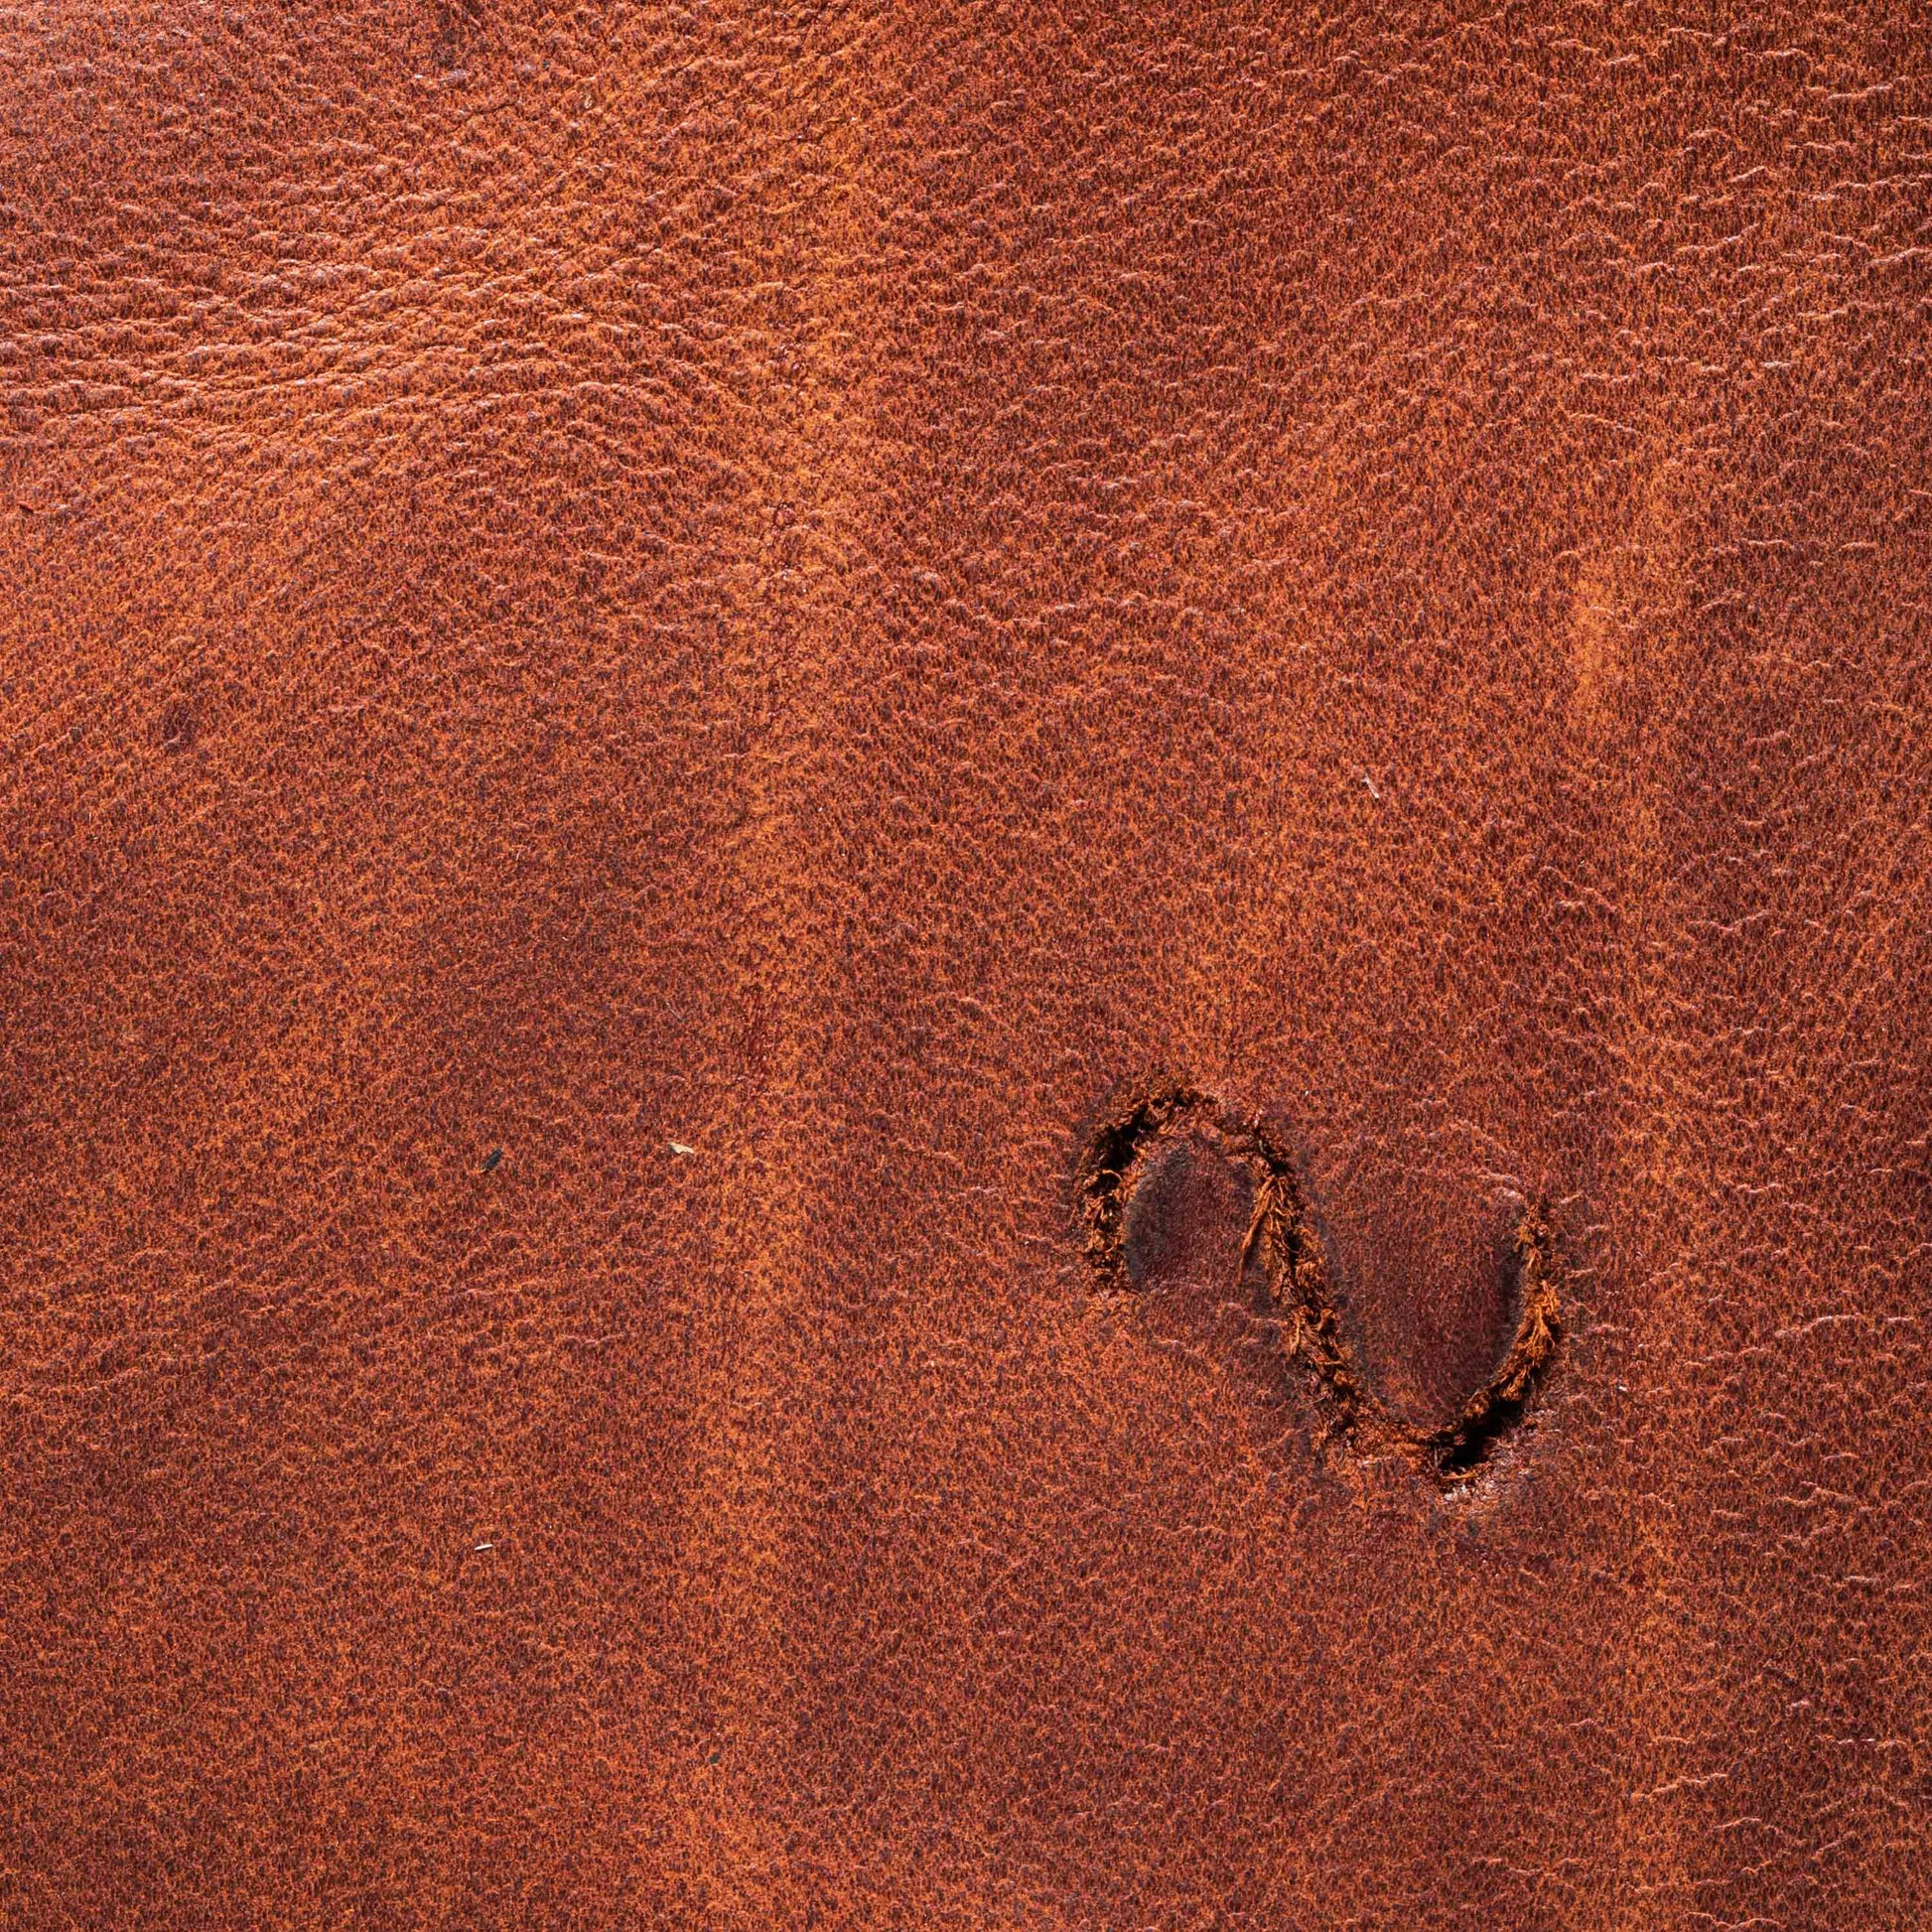 Premium Leather Collection – Explore our exclusive range of Cow, Kudu, and Oryx Genuine Full Grain Leathers. We keep it real with the finest materials, offering a touch of luxury and authenticity for your furniture.